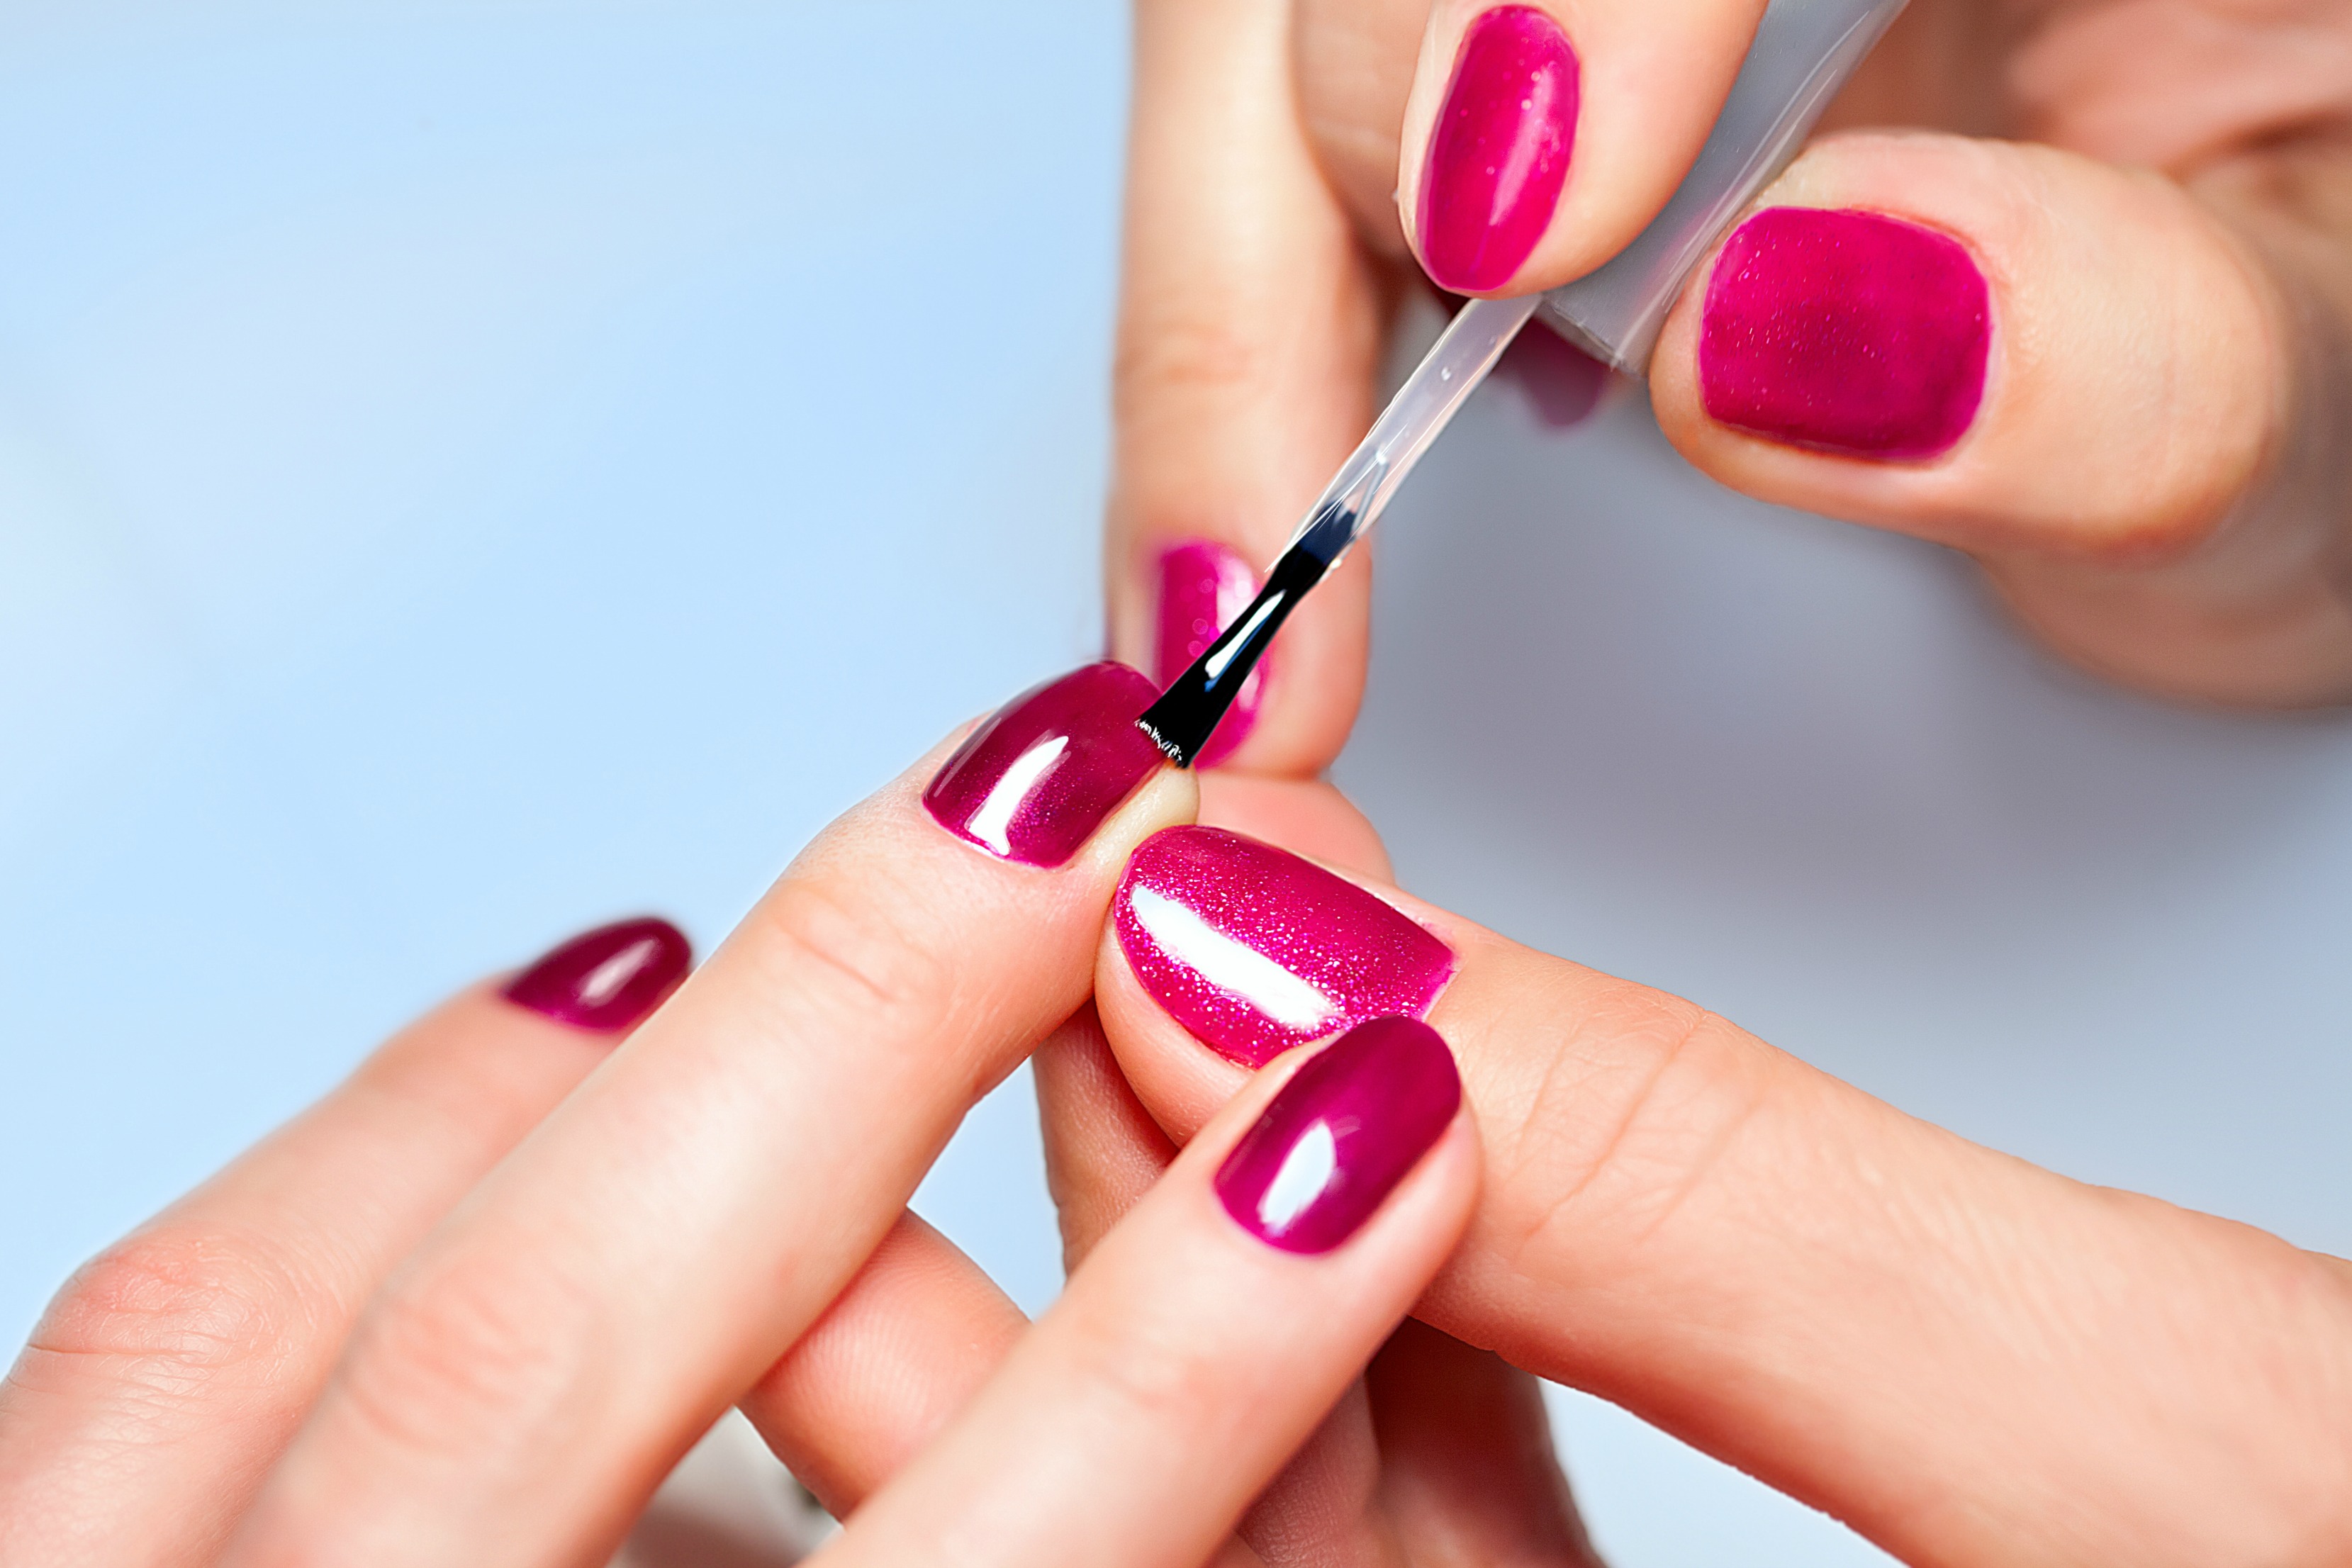 6. Step-by-Step Guide to Doing Nail Art at Home - wide 5